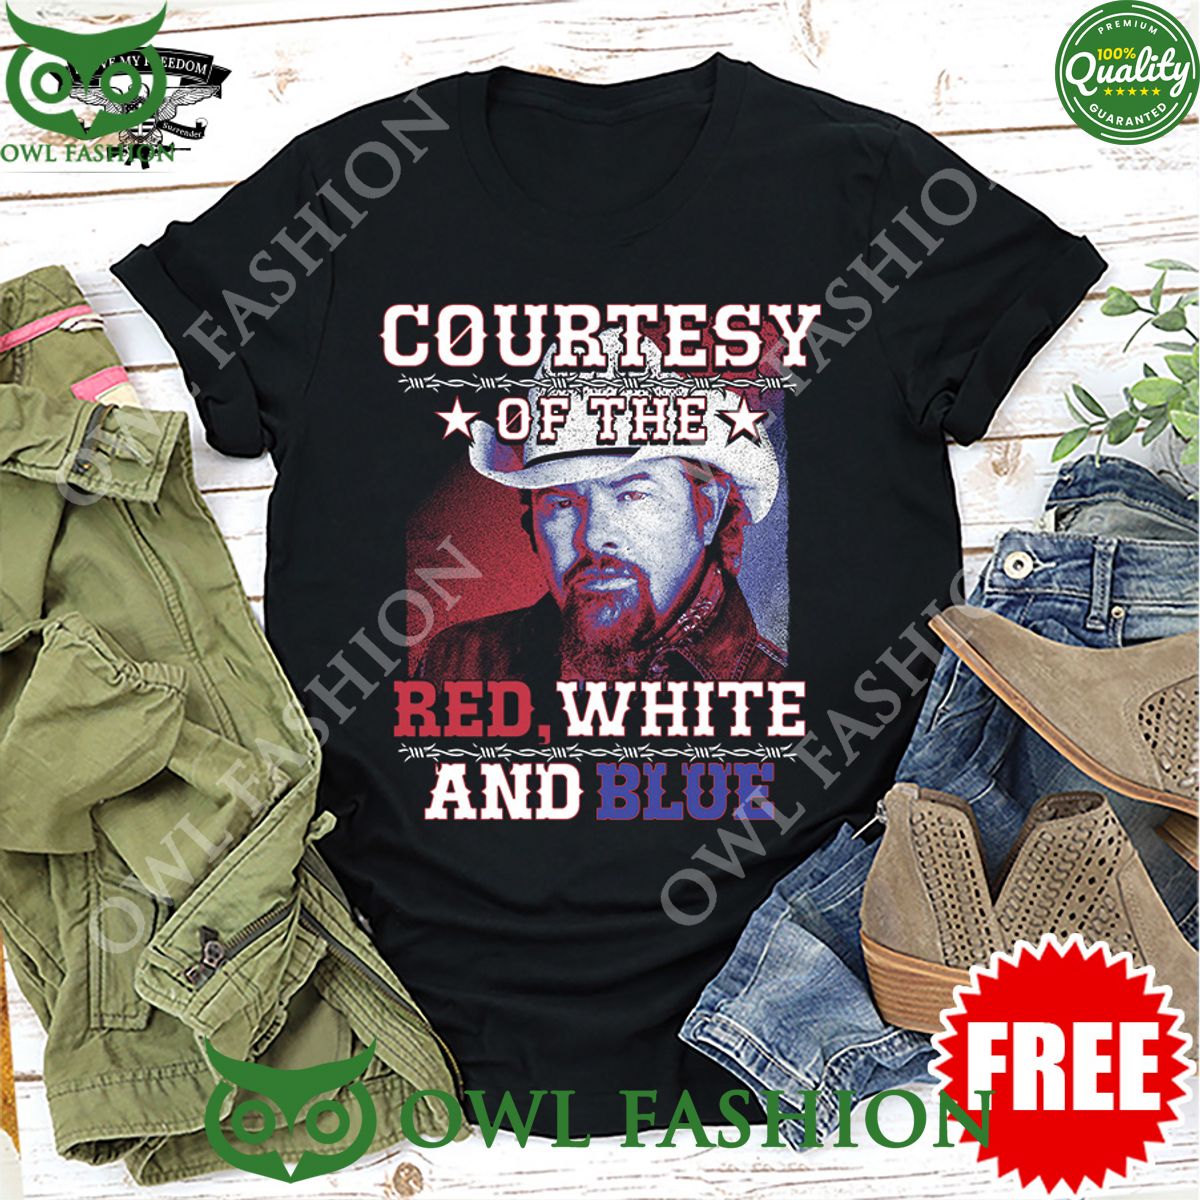 courtesy of the red white and blue song by toby keith the angry american t shirt 1 ij4Fr.jpg